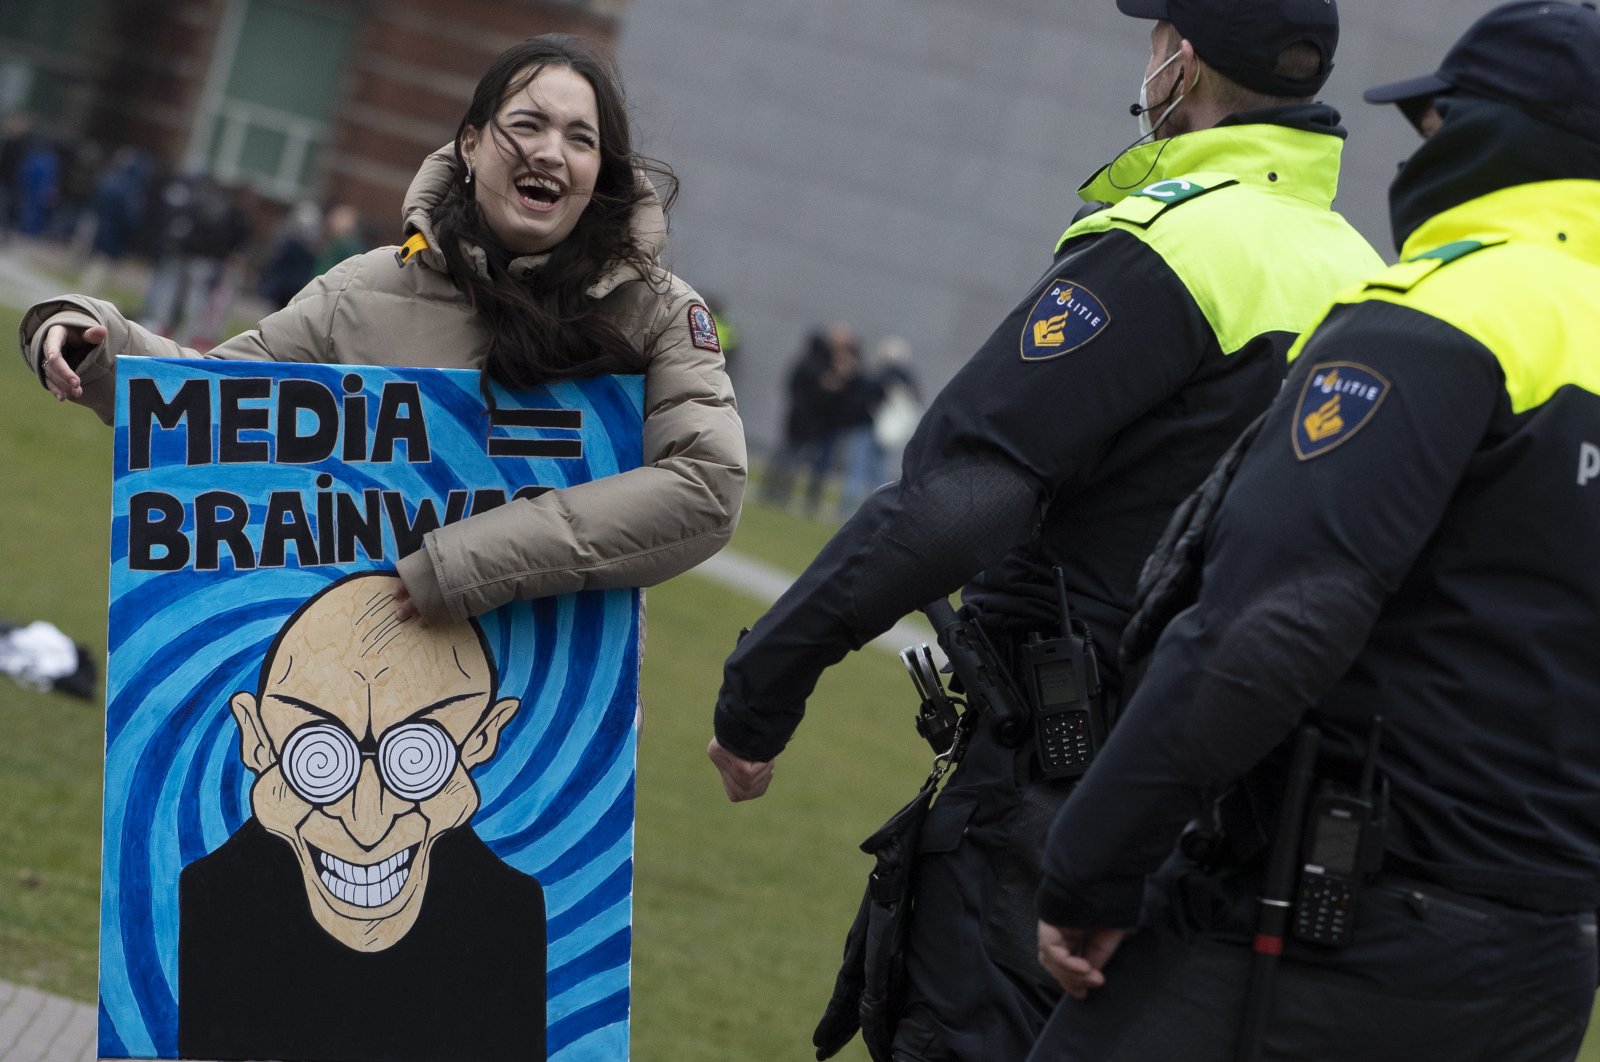 Dutch police talk to a demonstrator with a painting reading "Media = Brainwash" prior to breaking up a demonstration against coronavirus-related government policies in Amsterdam, The Netherlands, March 28, 2021. (AP Photo)